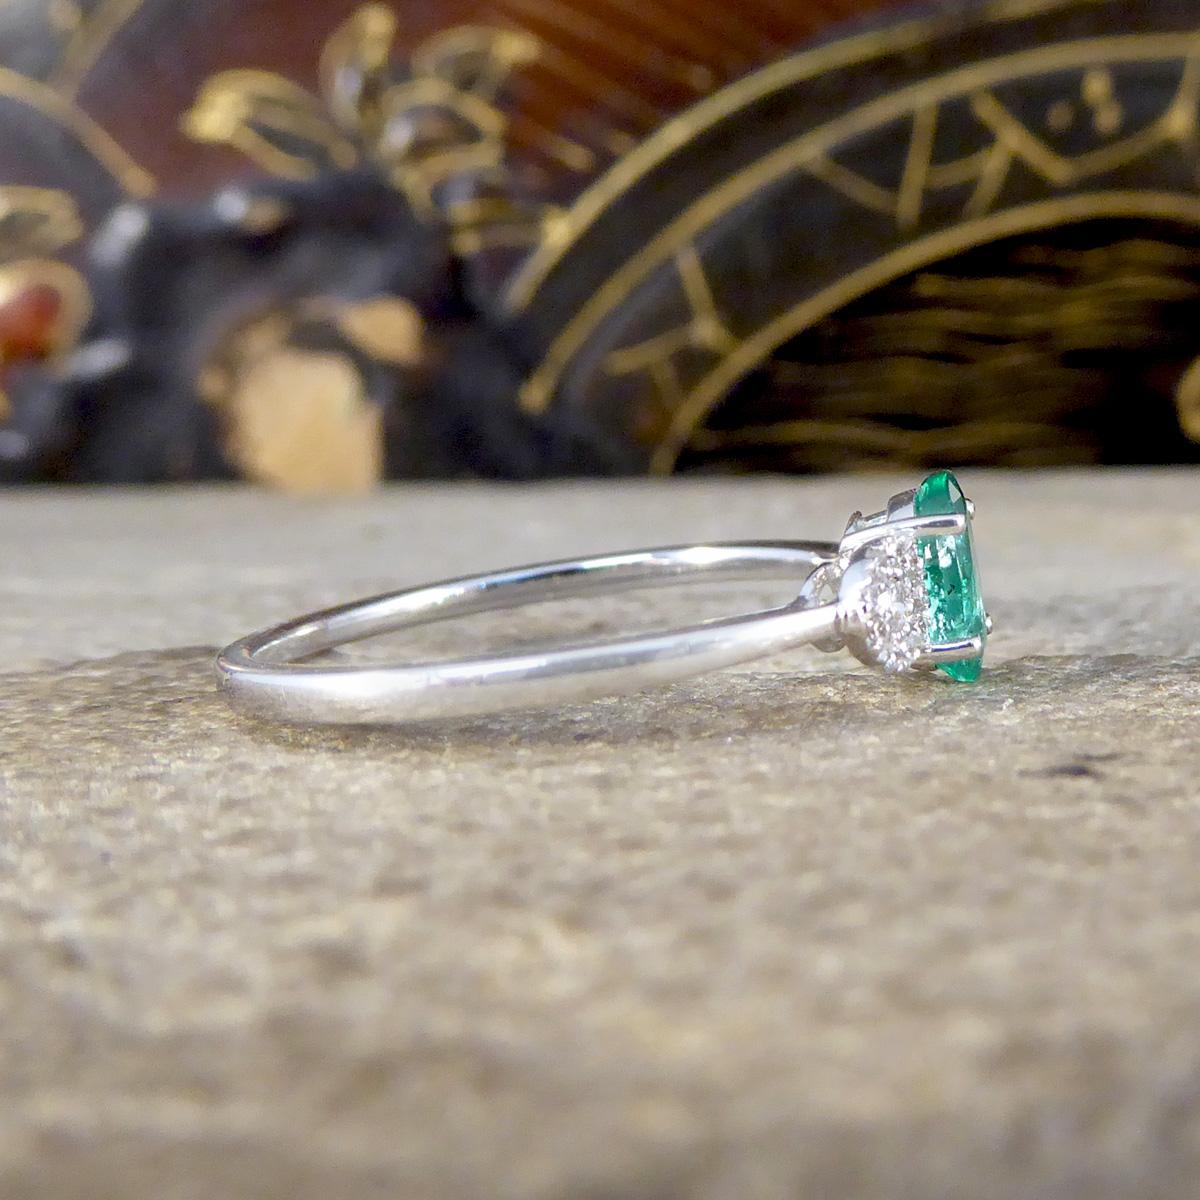 A beautiful and bright three stone illusion ring. Featuring in the centre of this new ring is a 0.38ct bright green Emerald with typical Emeralds flaws in a four claw basket setting accompanied by a Diamond cluster on either side. The Diamond